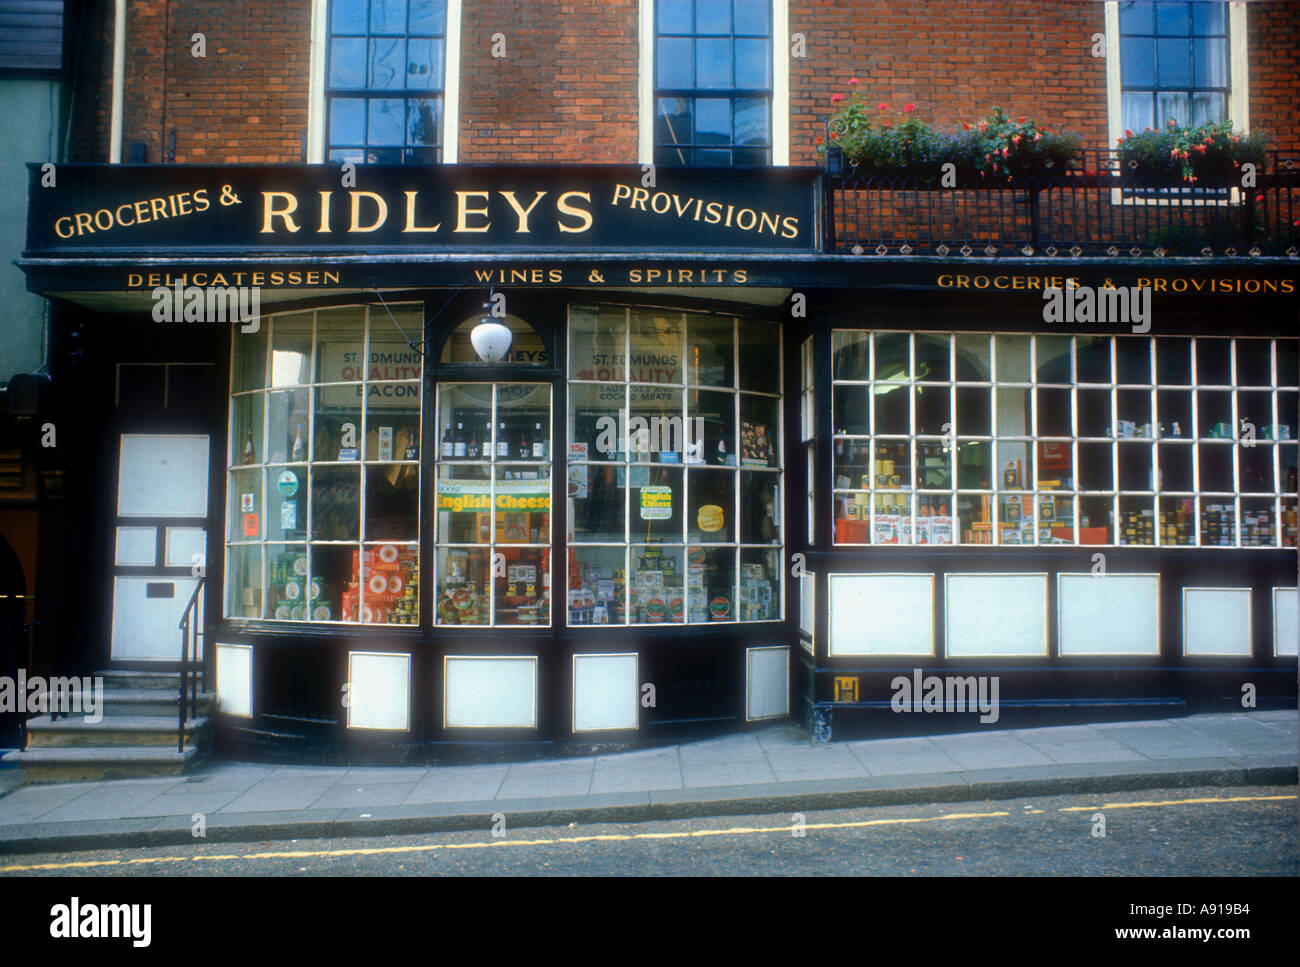 The facade of an English grocers shop in Bury St Edmunds Suffolk East Anglia UK Stock Photo